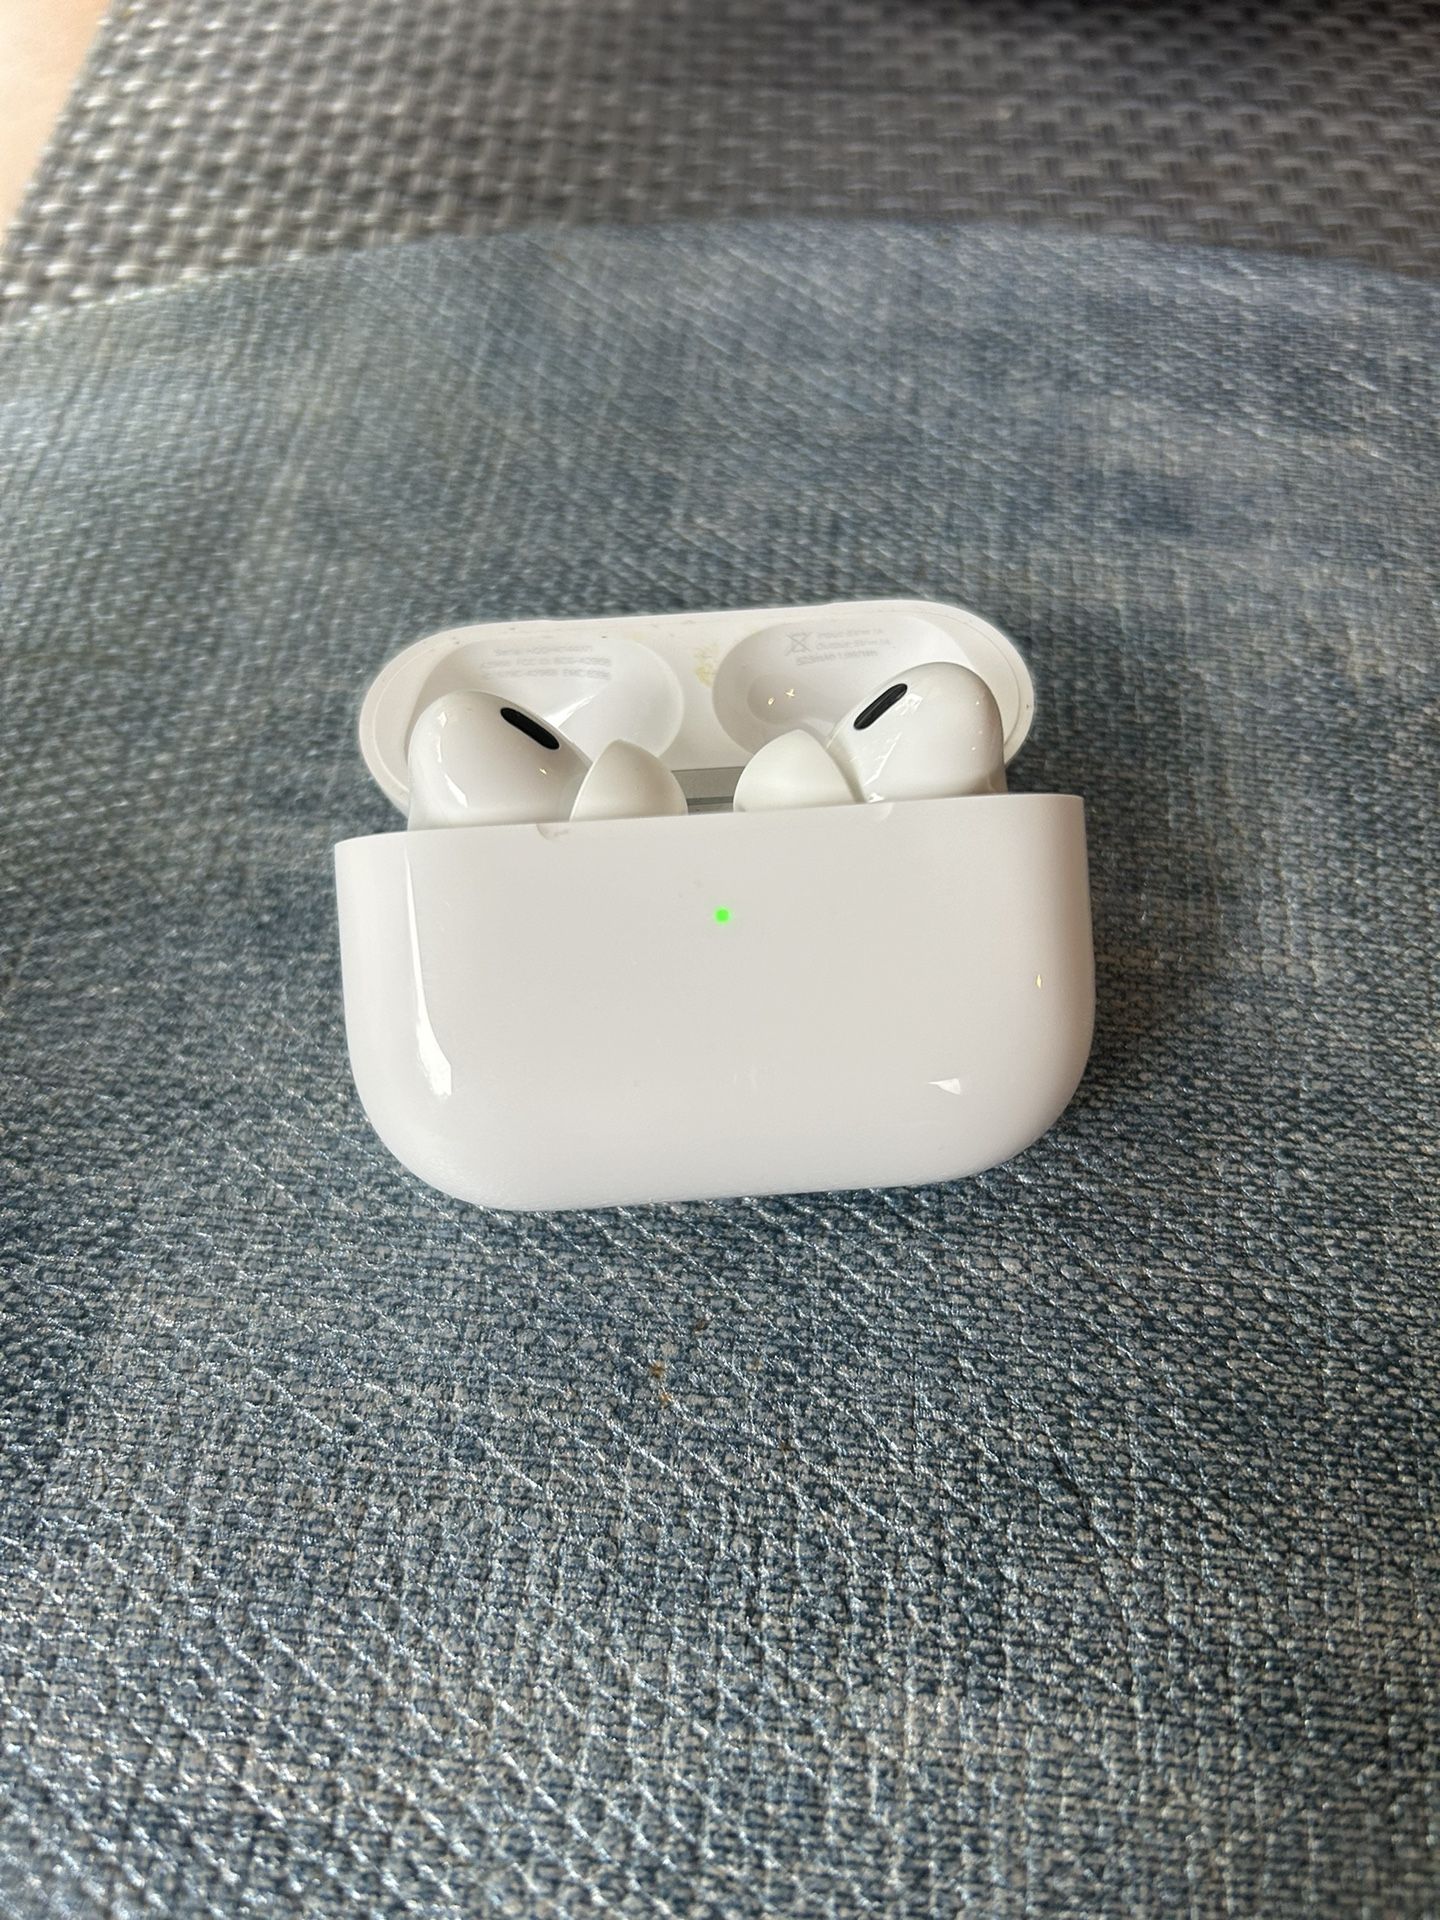 Real Apple AirPods 2 Pro C Cable Port